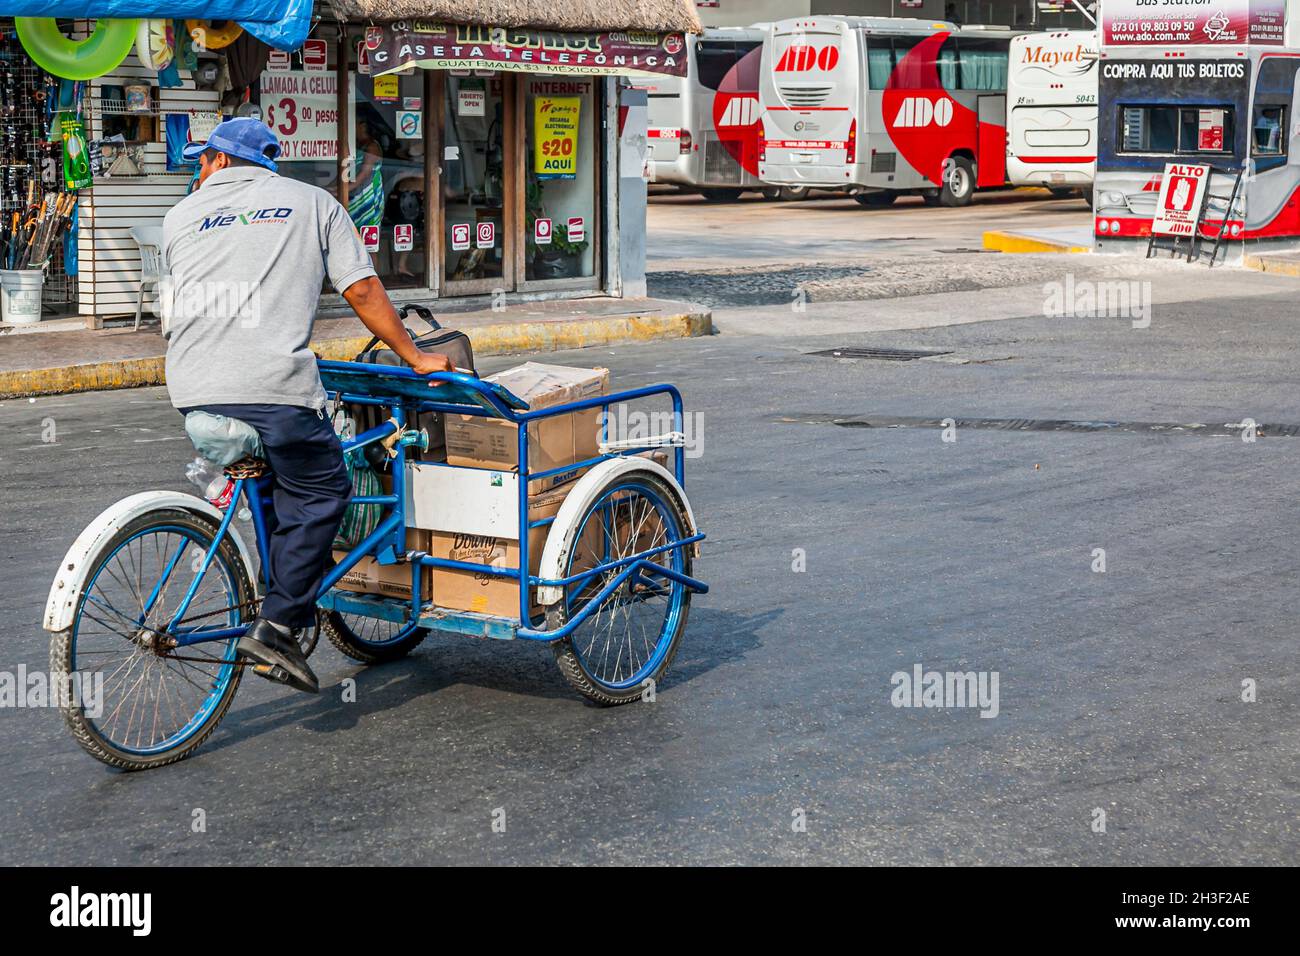 Mexico, May 2011 - Street vendor or delivery man riding a tricycle with goods in a neighbourhood of Playa del Carmen, Mexico Stock Photo